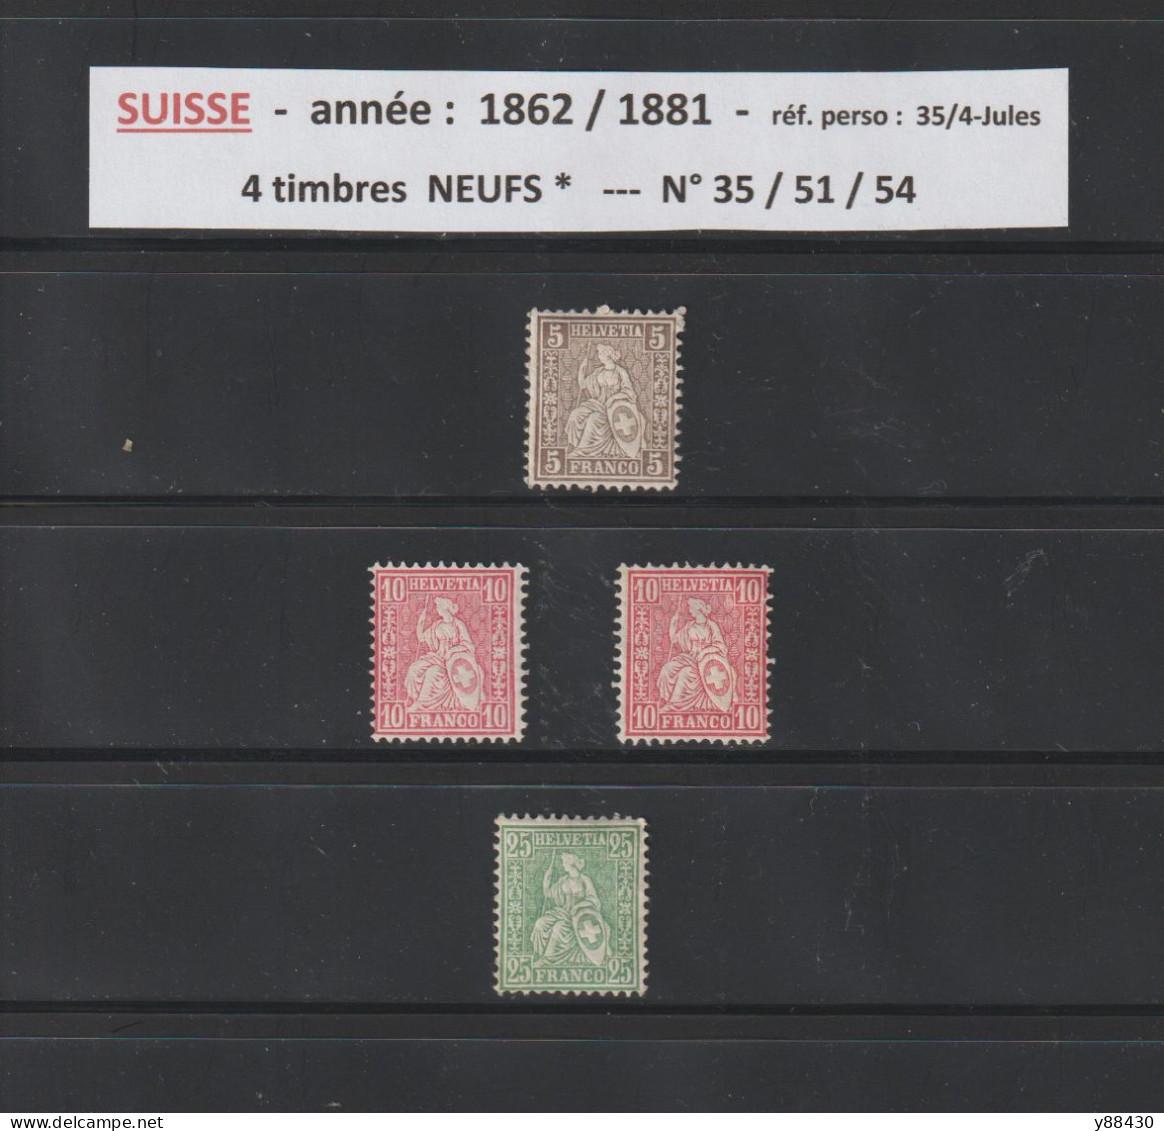 SUISSE - 4 Timbres Neufs * - N° 35 / 51 / 54 De 1862/1881 -  Helvetia Assise - 2 Scan - Nuovi